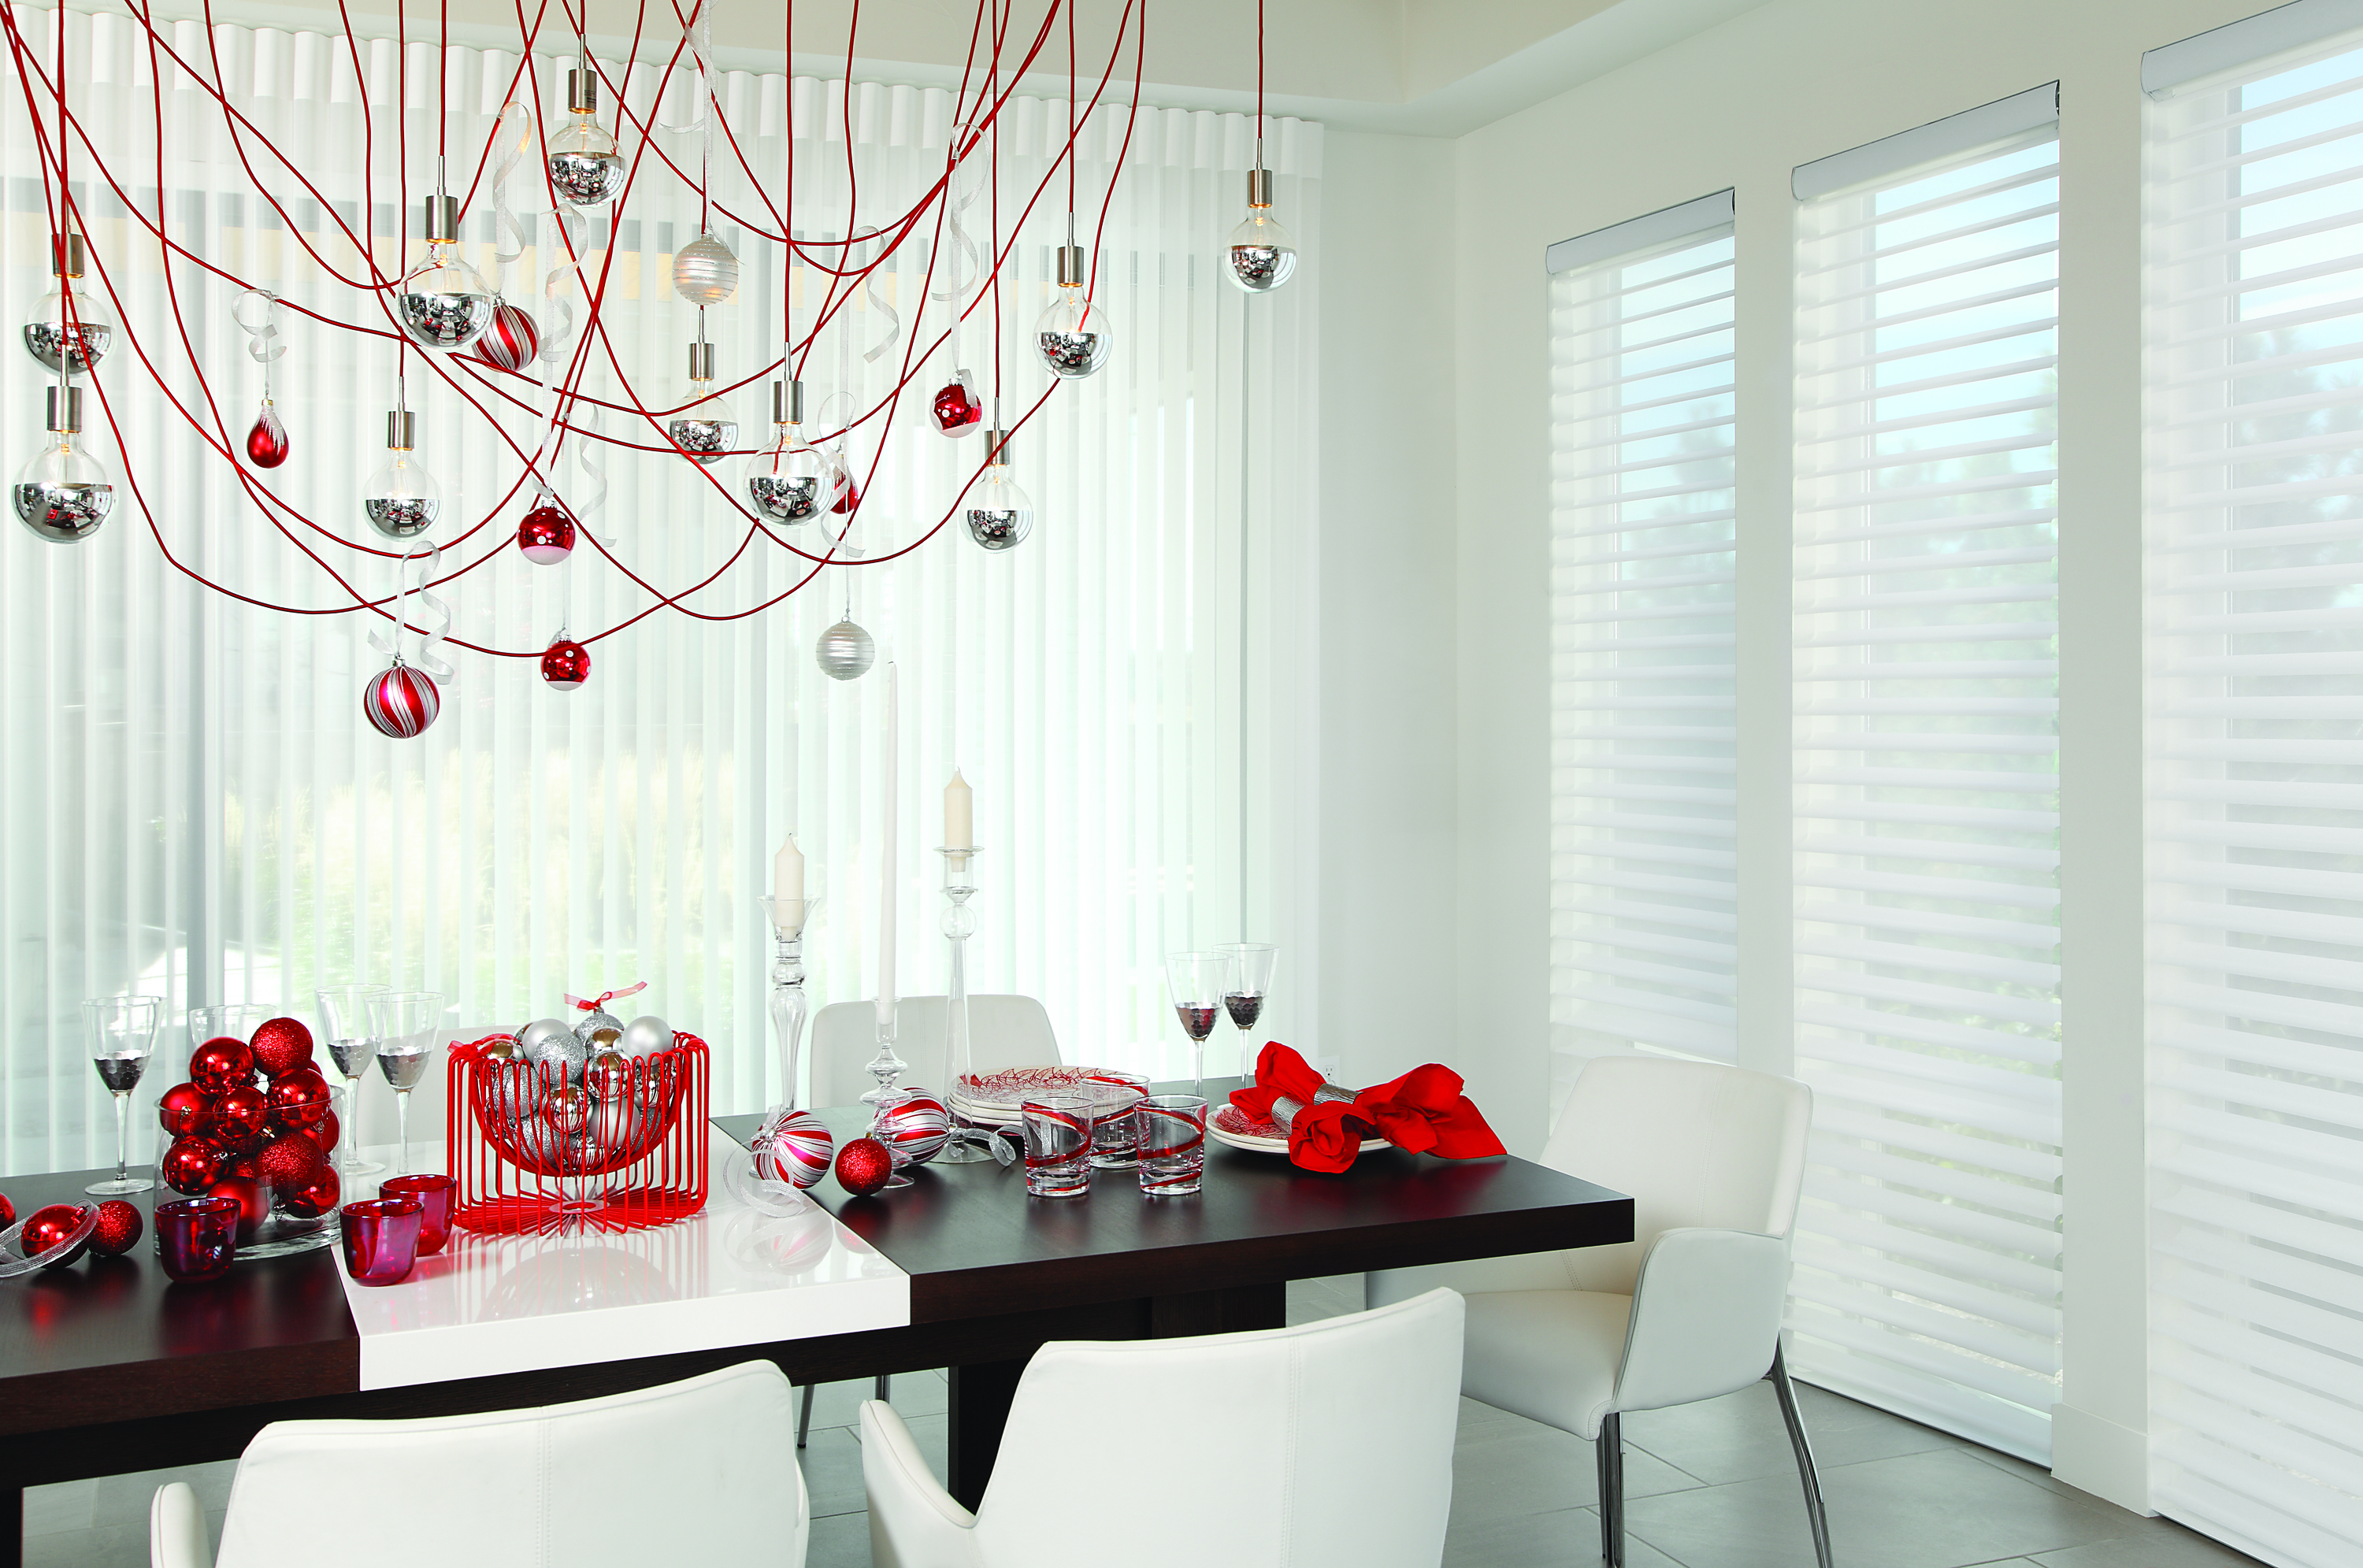 Hunter Douglas Luminette and Silhouette Window Shadings in dining room decorated for holidays